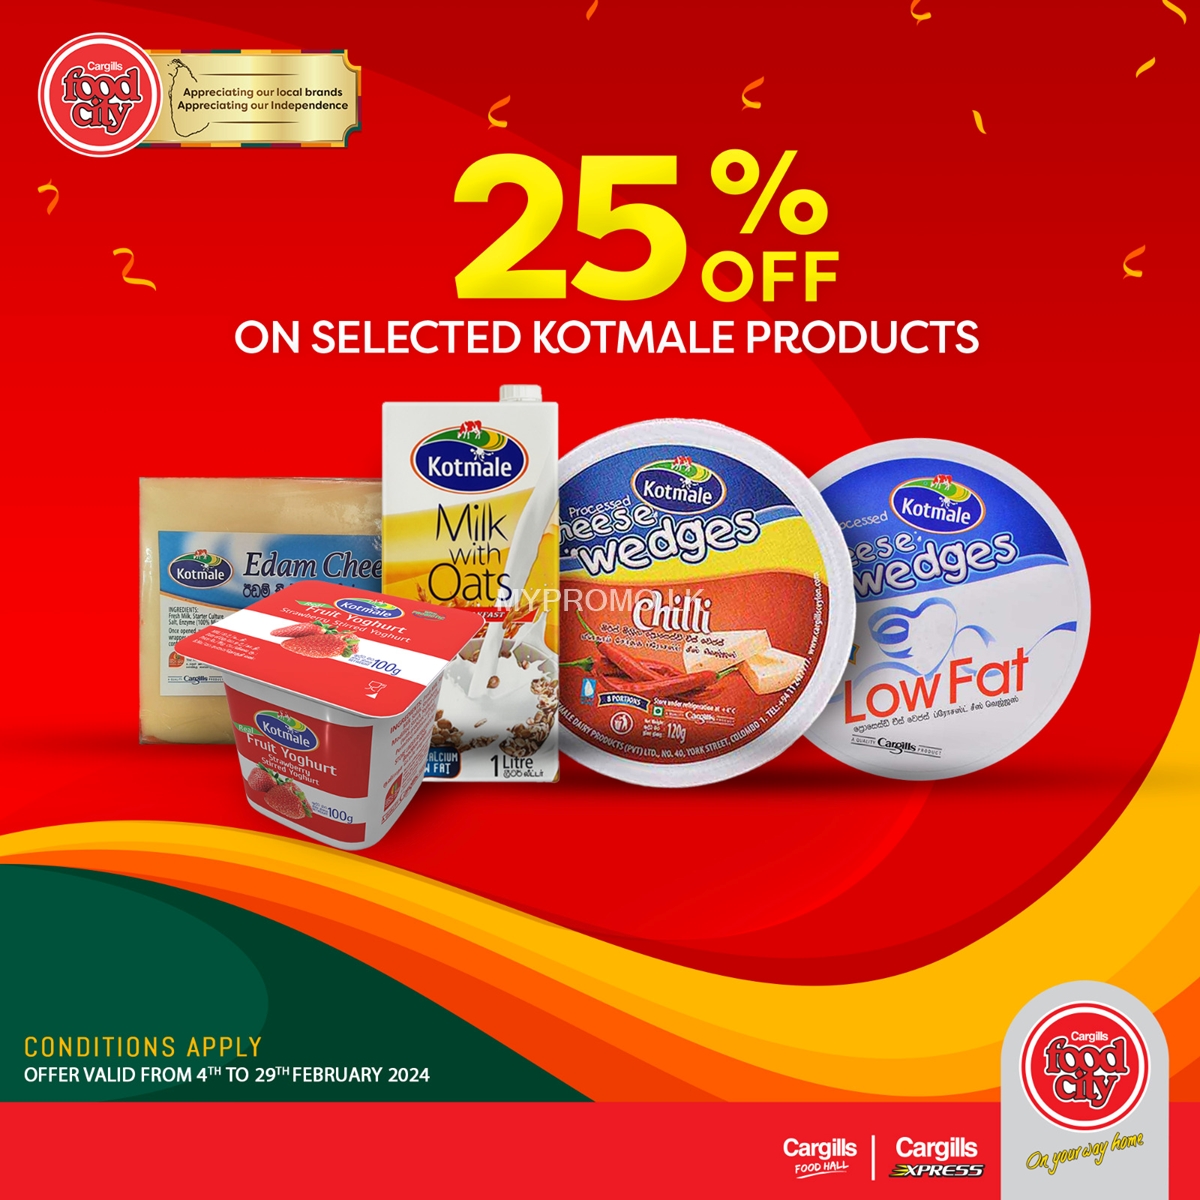 Savings of up to 30% on 100 products from a range of selected brands at Cargills Food City